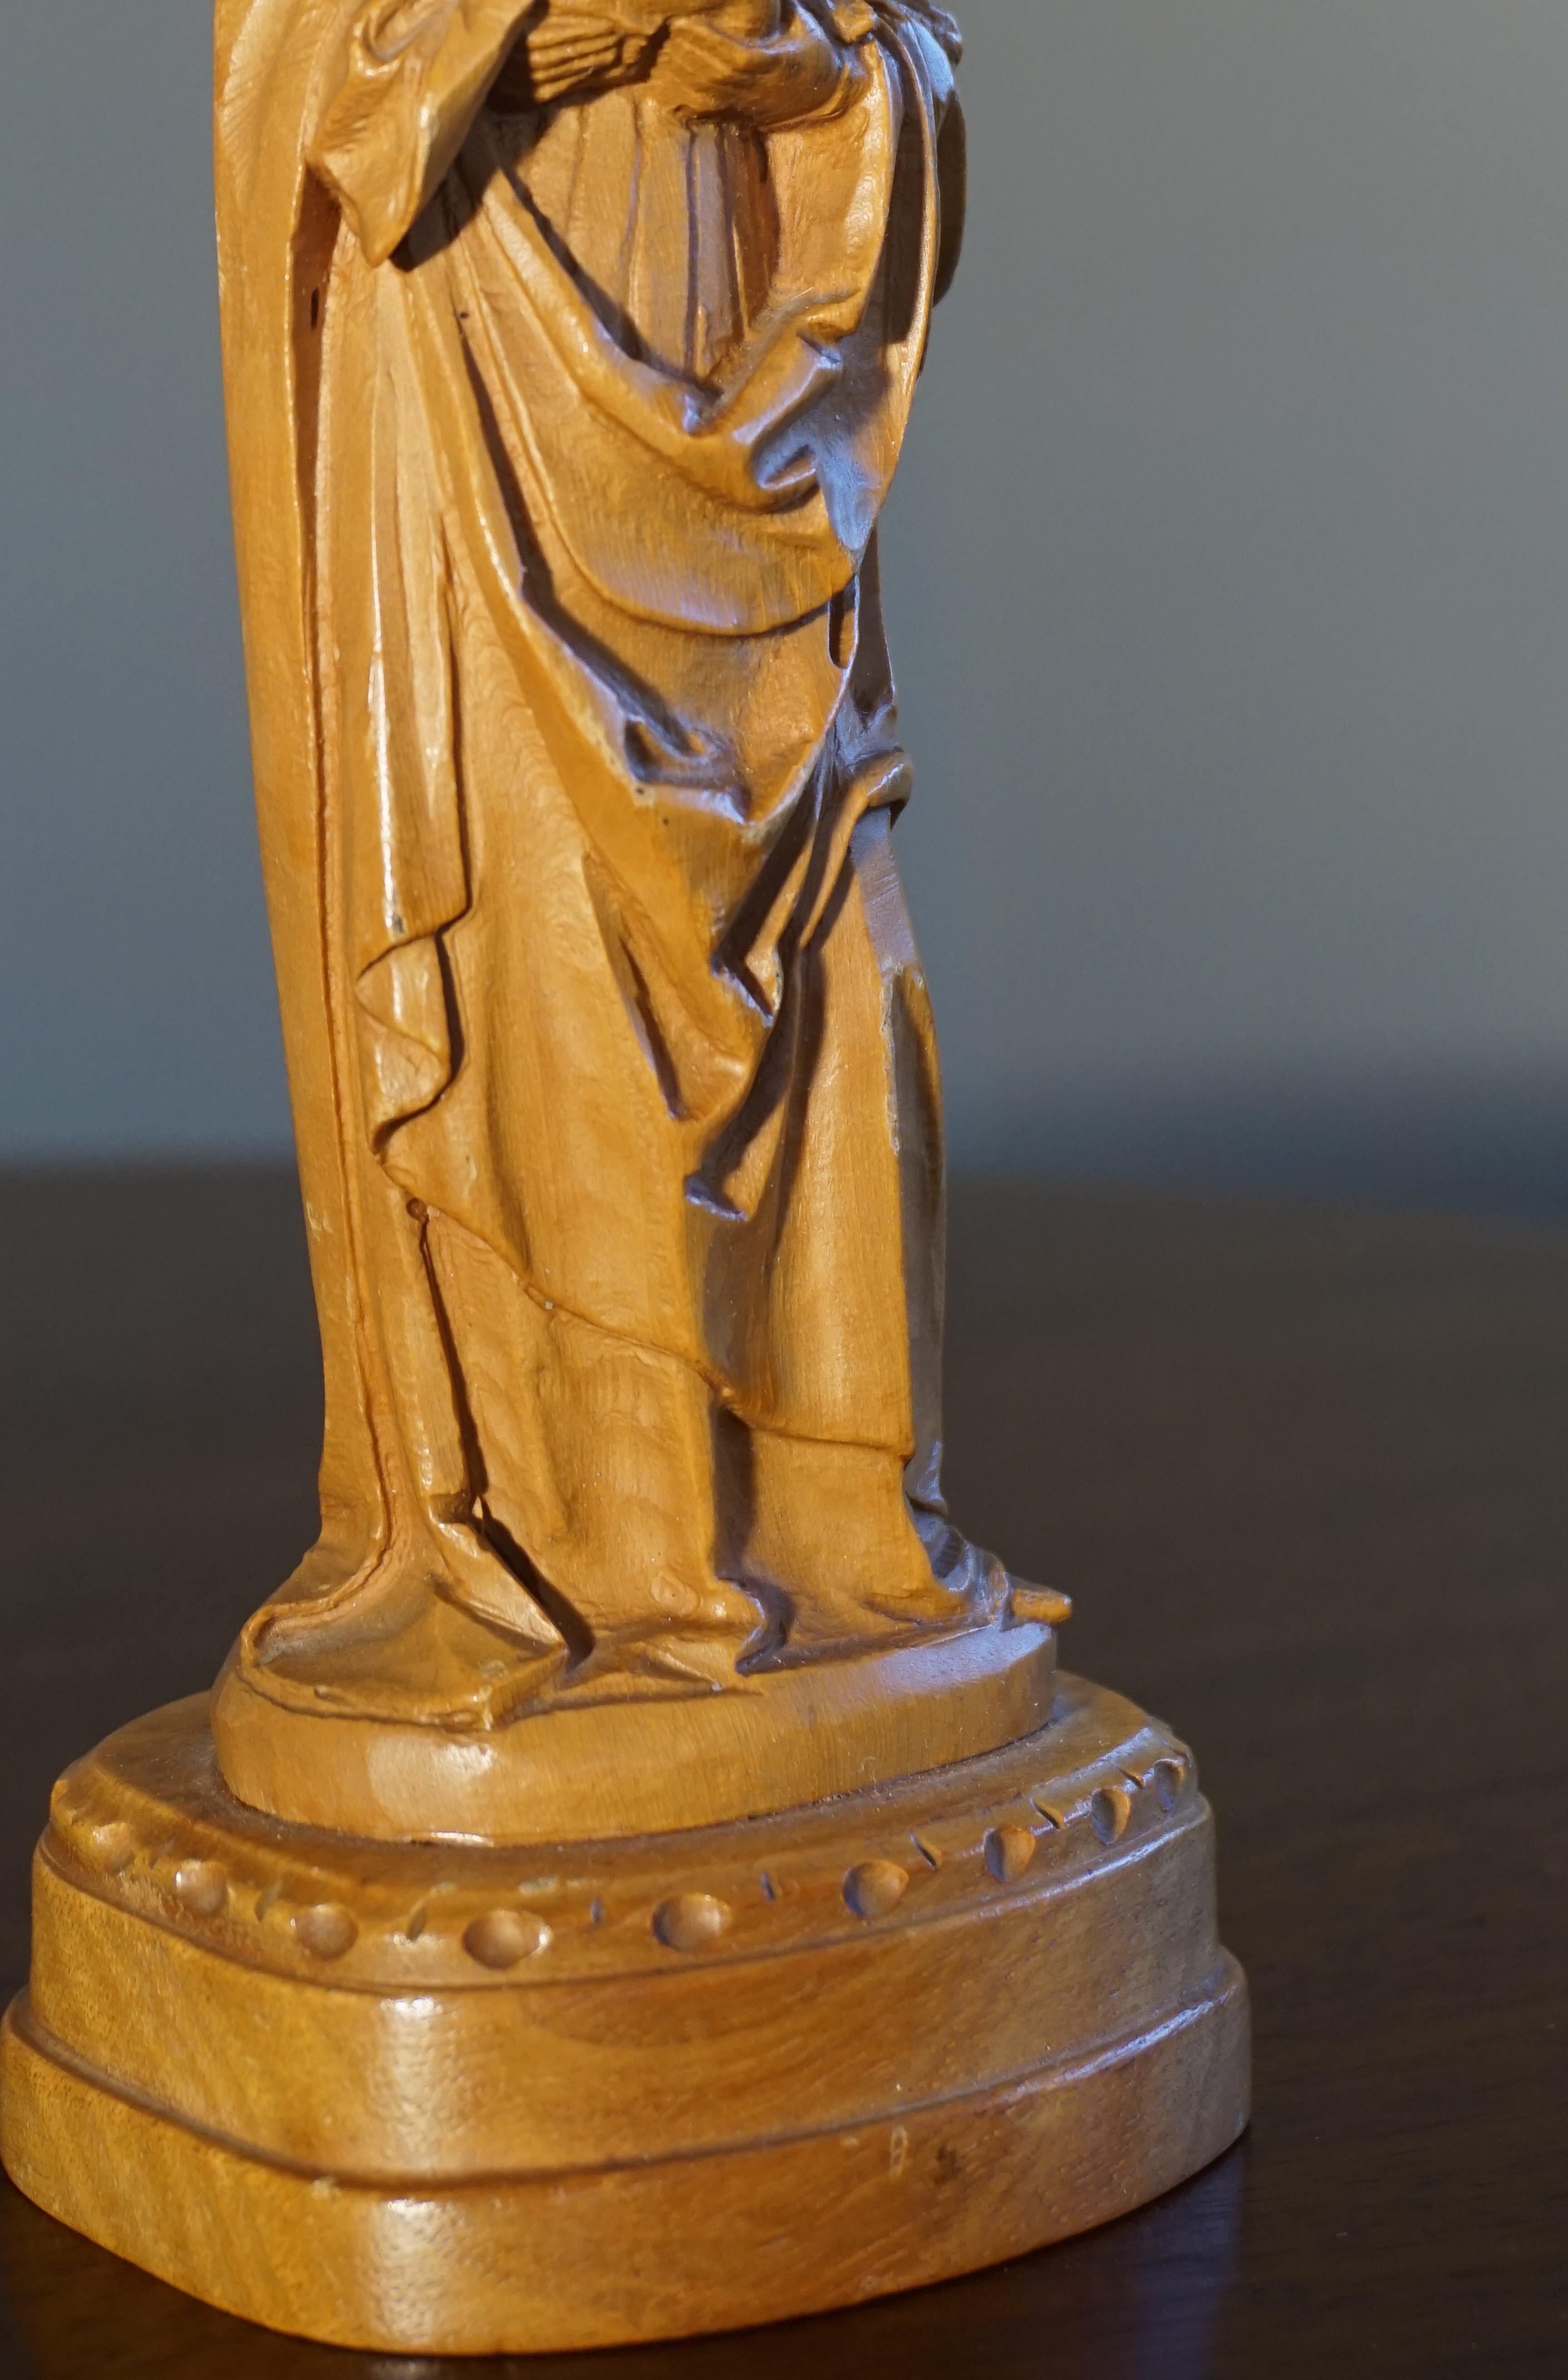 Hand-Carved Finest Quality, Hand Carved Miniature Statue of Mother Mary Holding Child Jesus